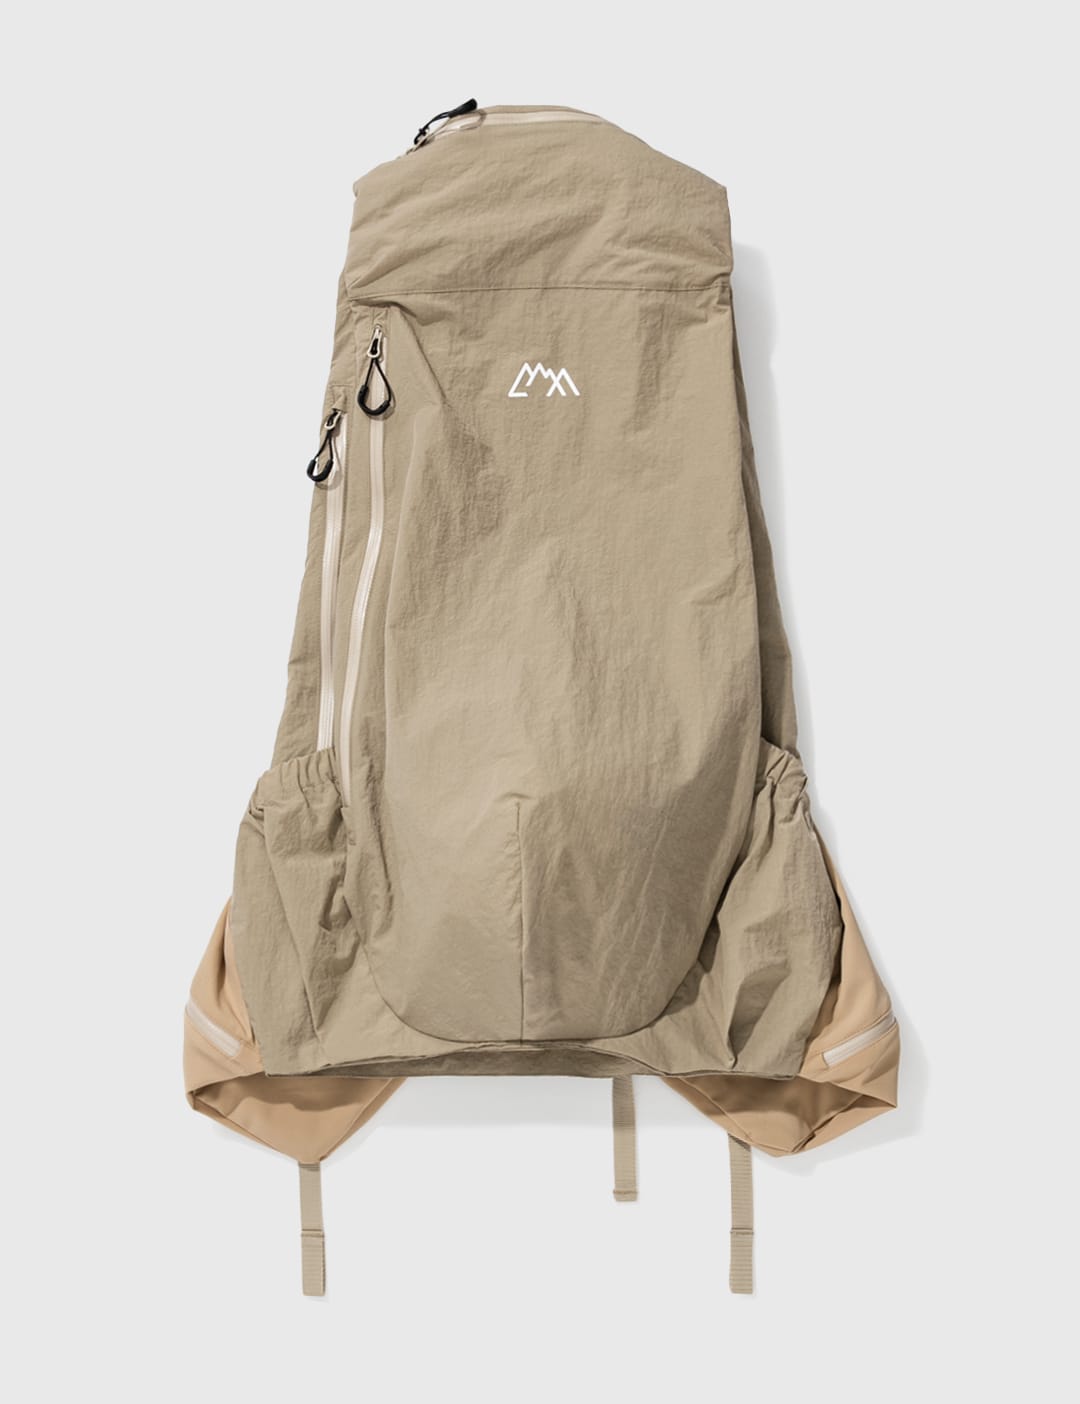 Comfy Outdoor Garment - Step Out Vest | HBX - Globally Curated 